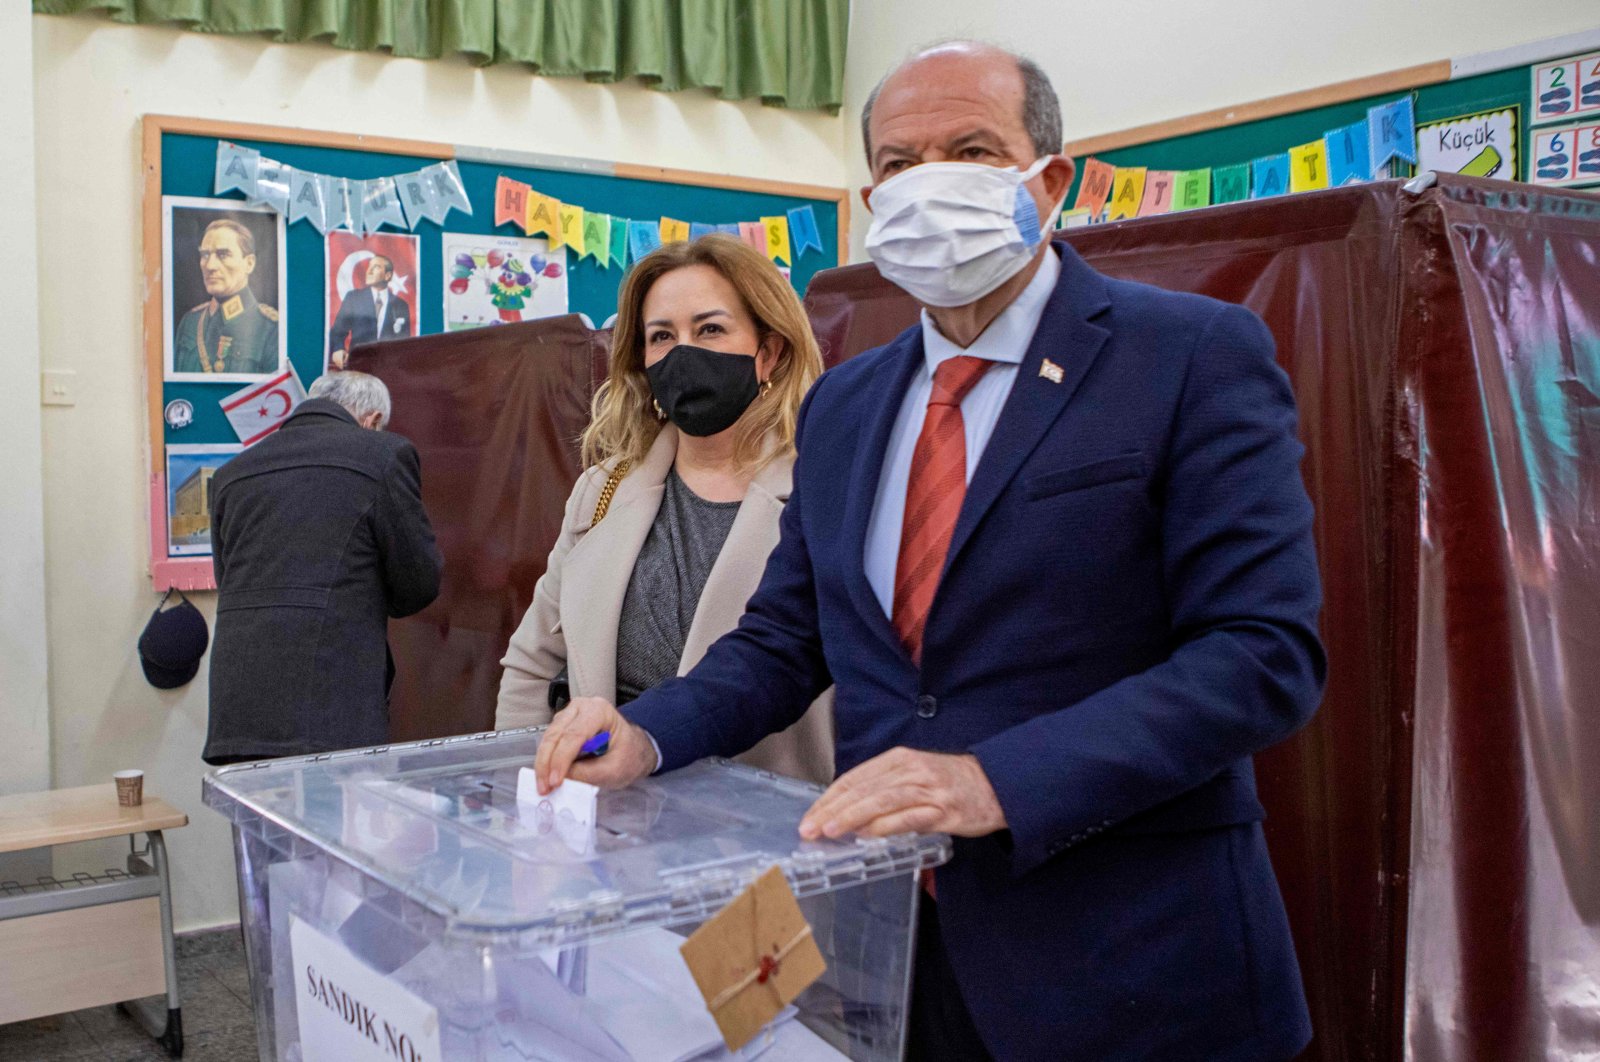 President Ersin Tatar alongside his wife casts his ballot at a polling station in the capital Lefkoşa (Nicosia), TRNC, Jan. 23, 2022. (AFP Photo)